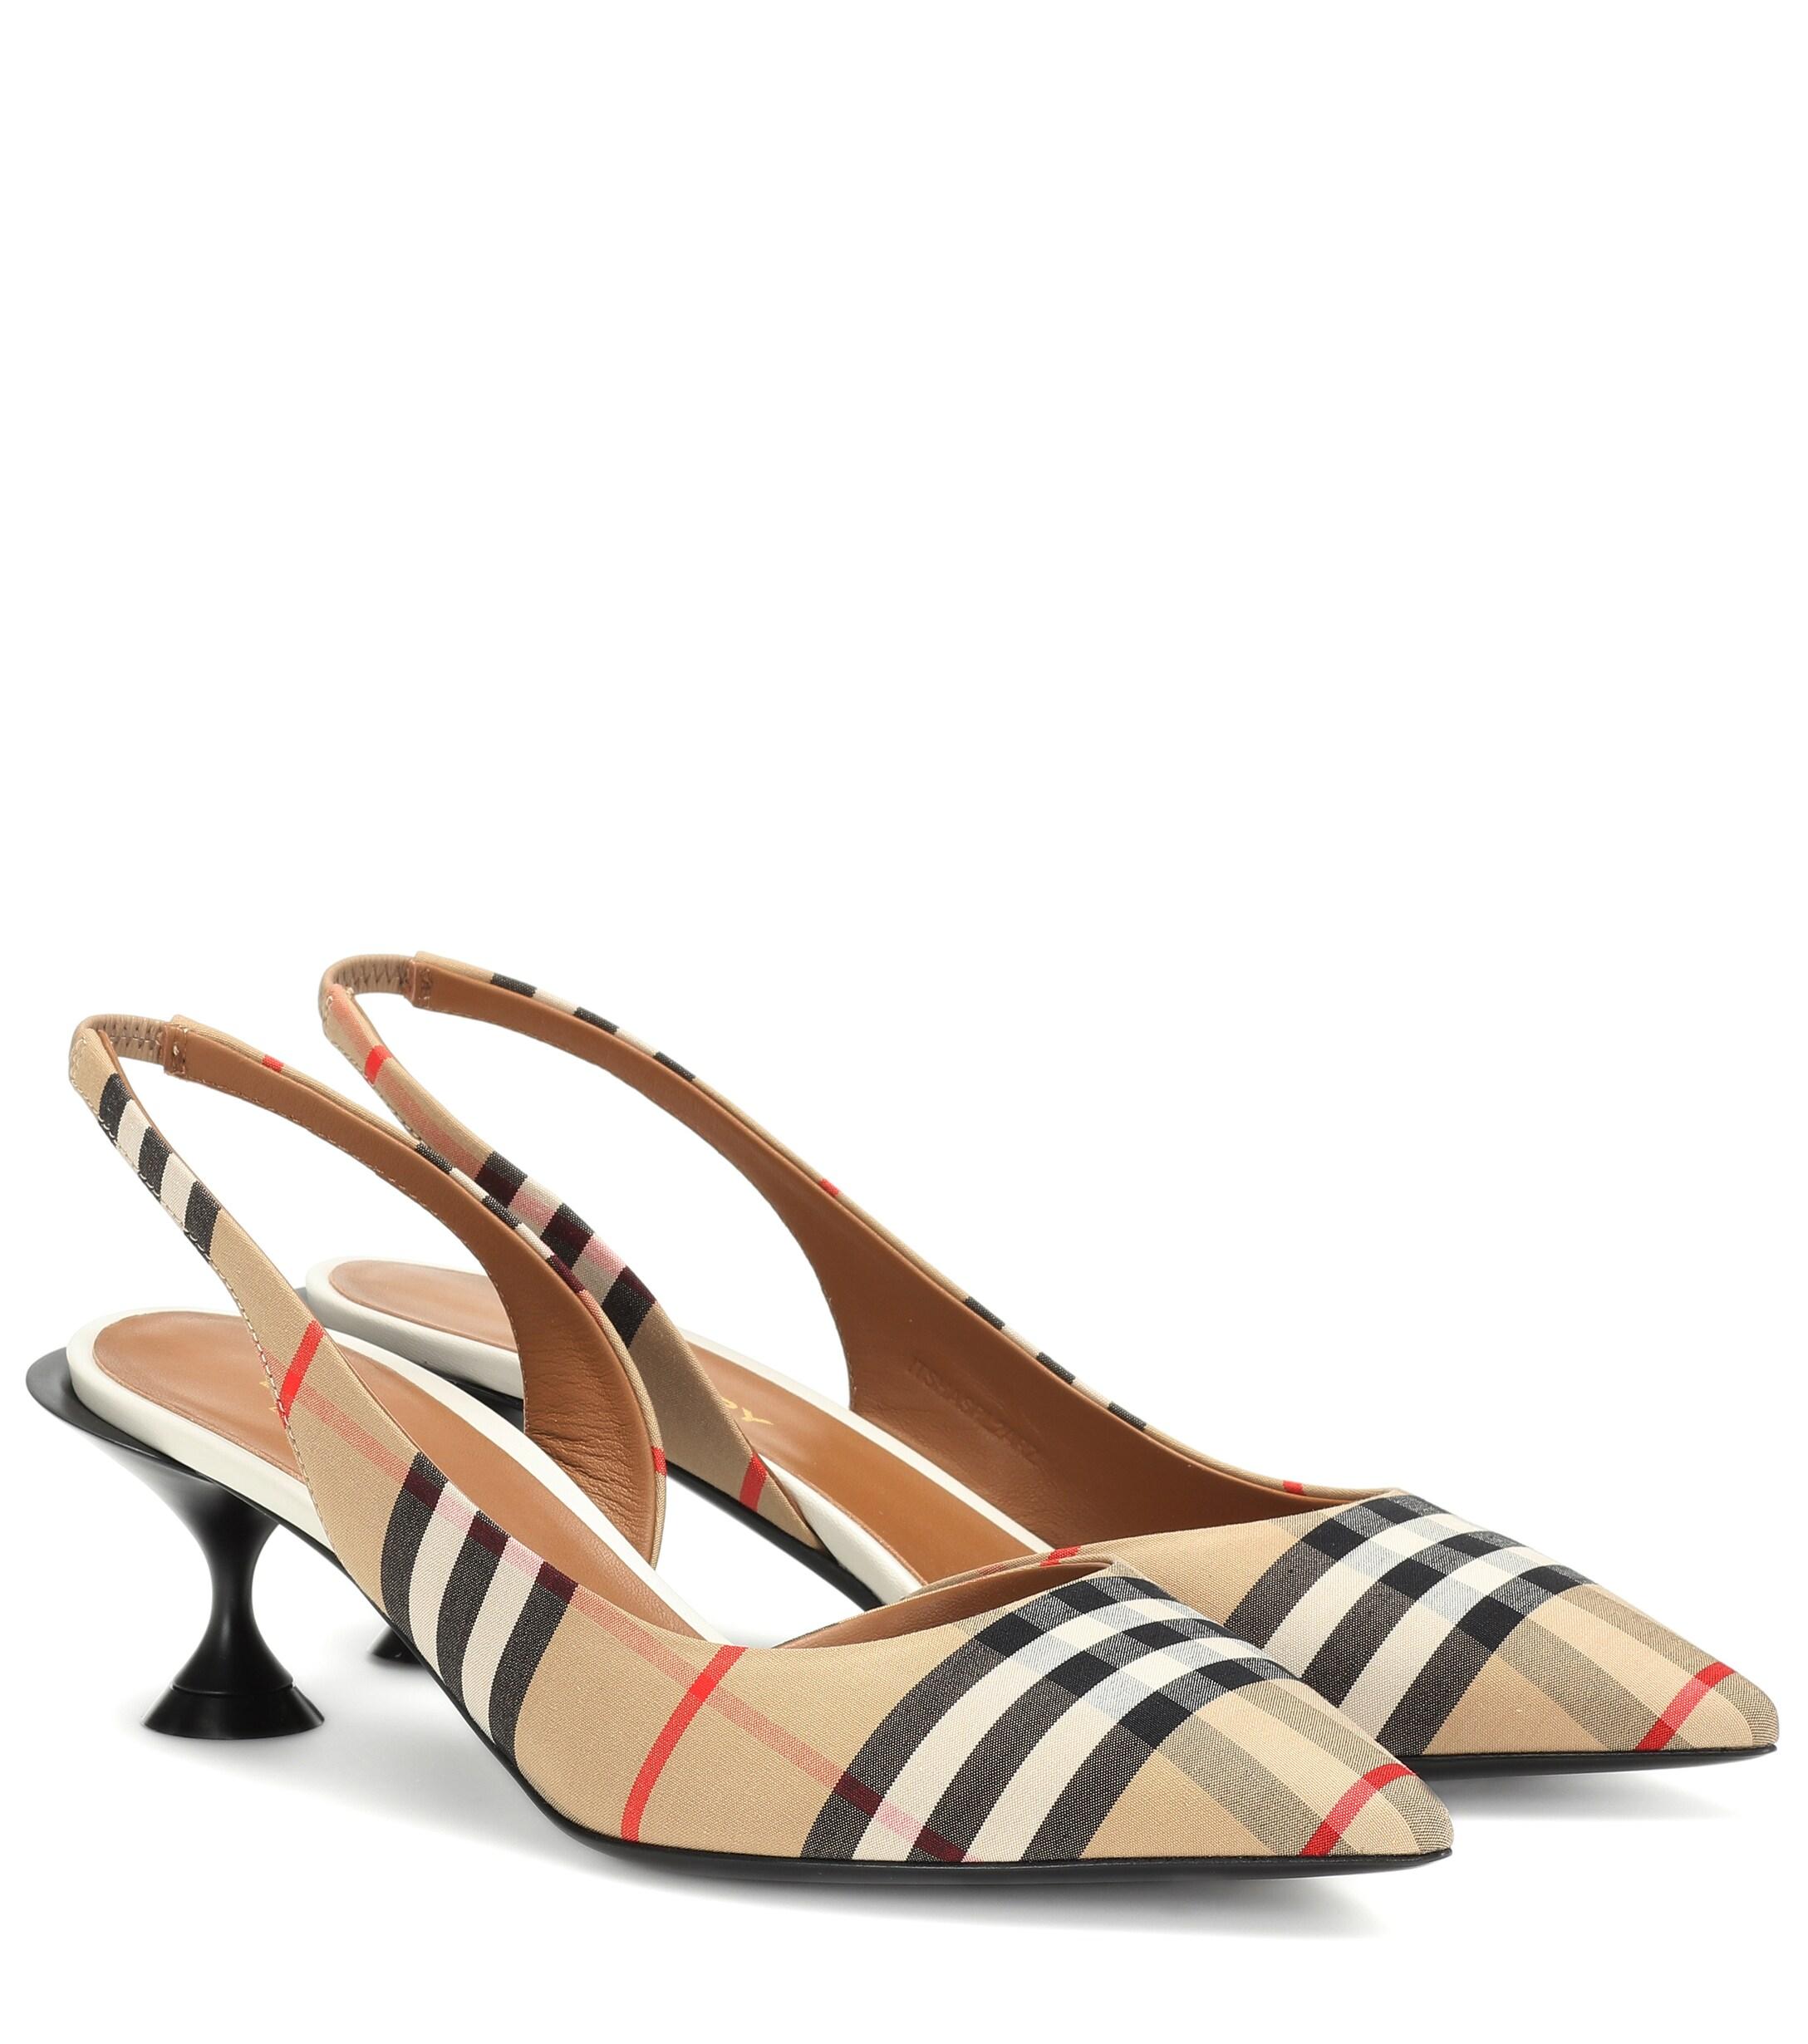 Burberry Leticia Leather Slingback Pumps - Lyst